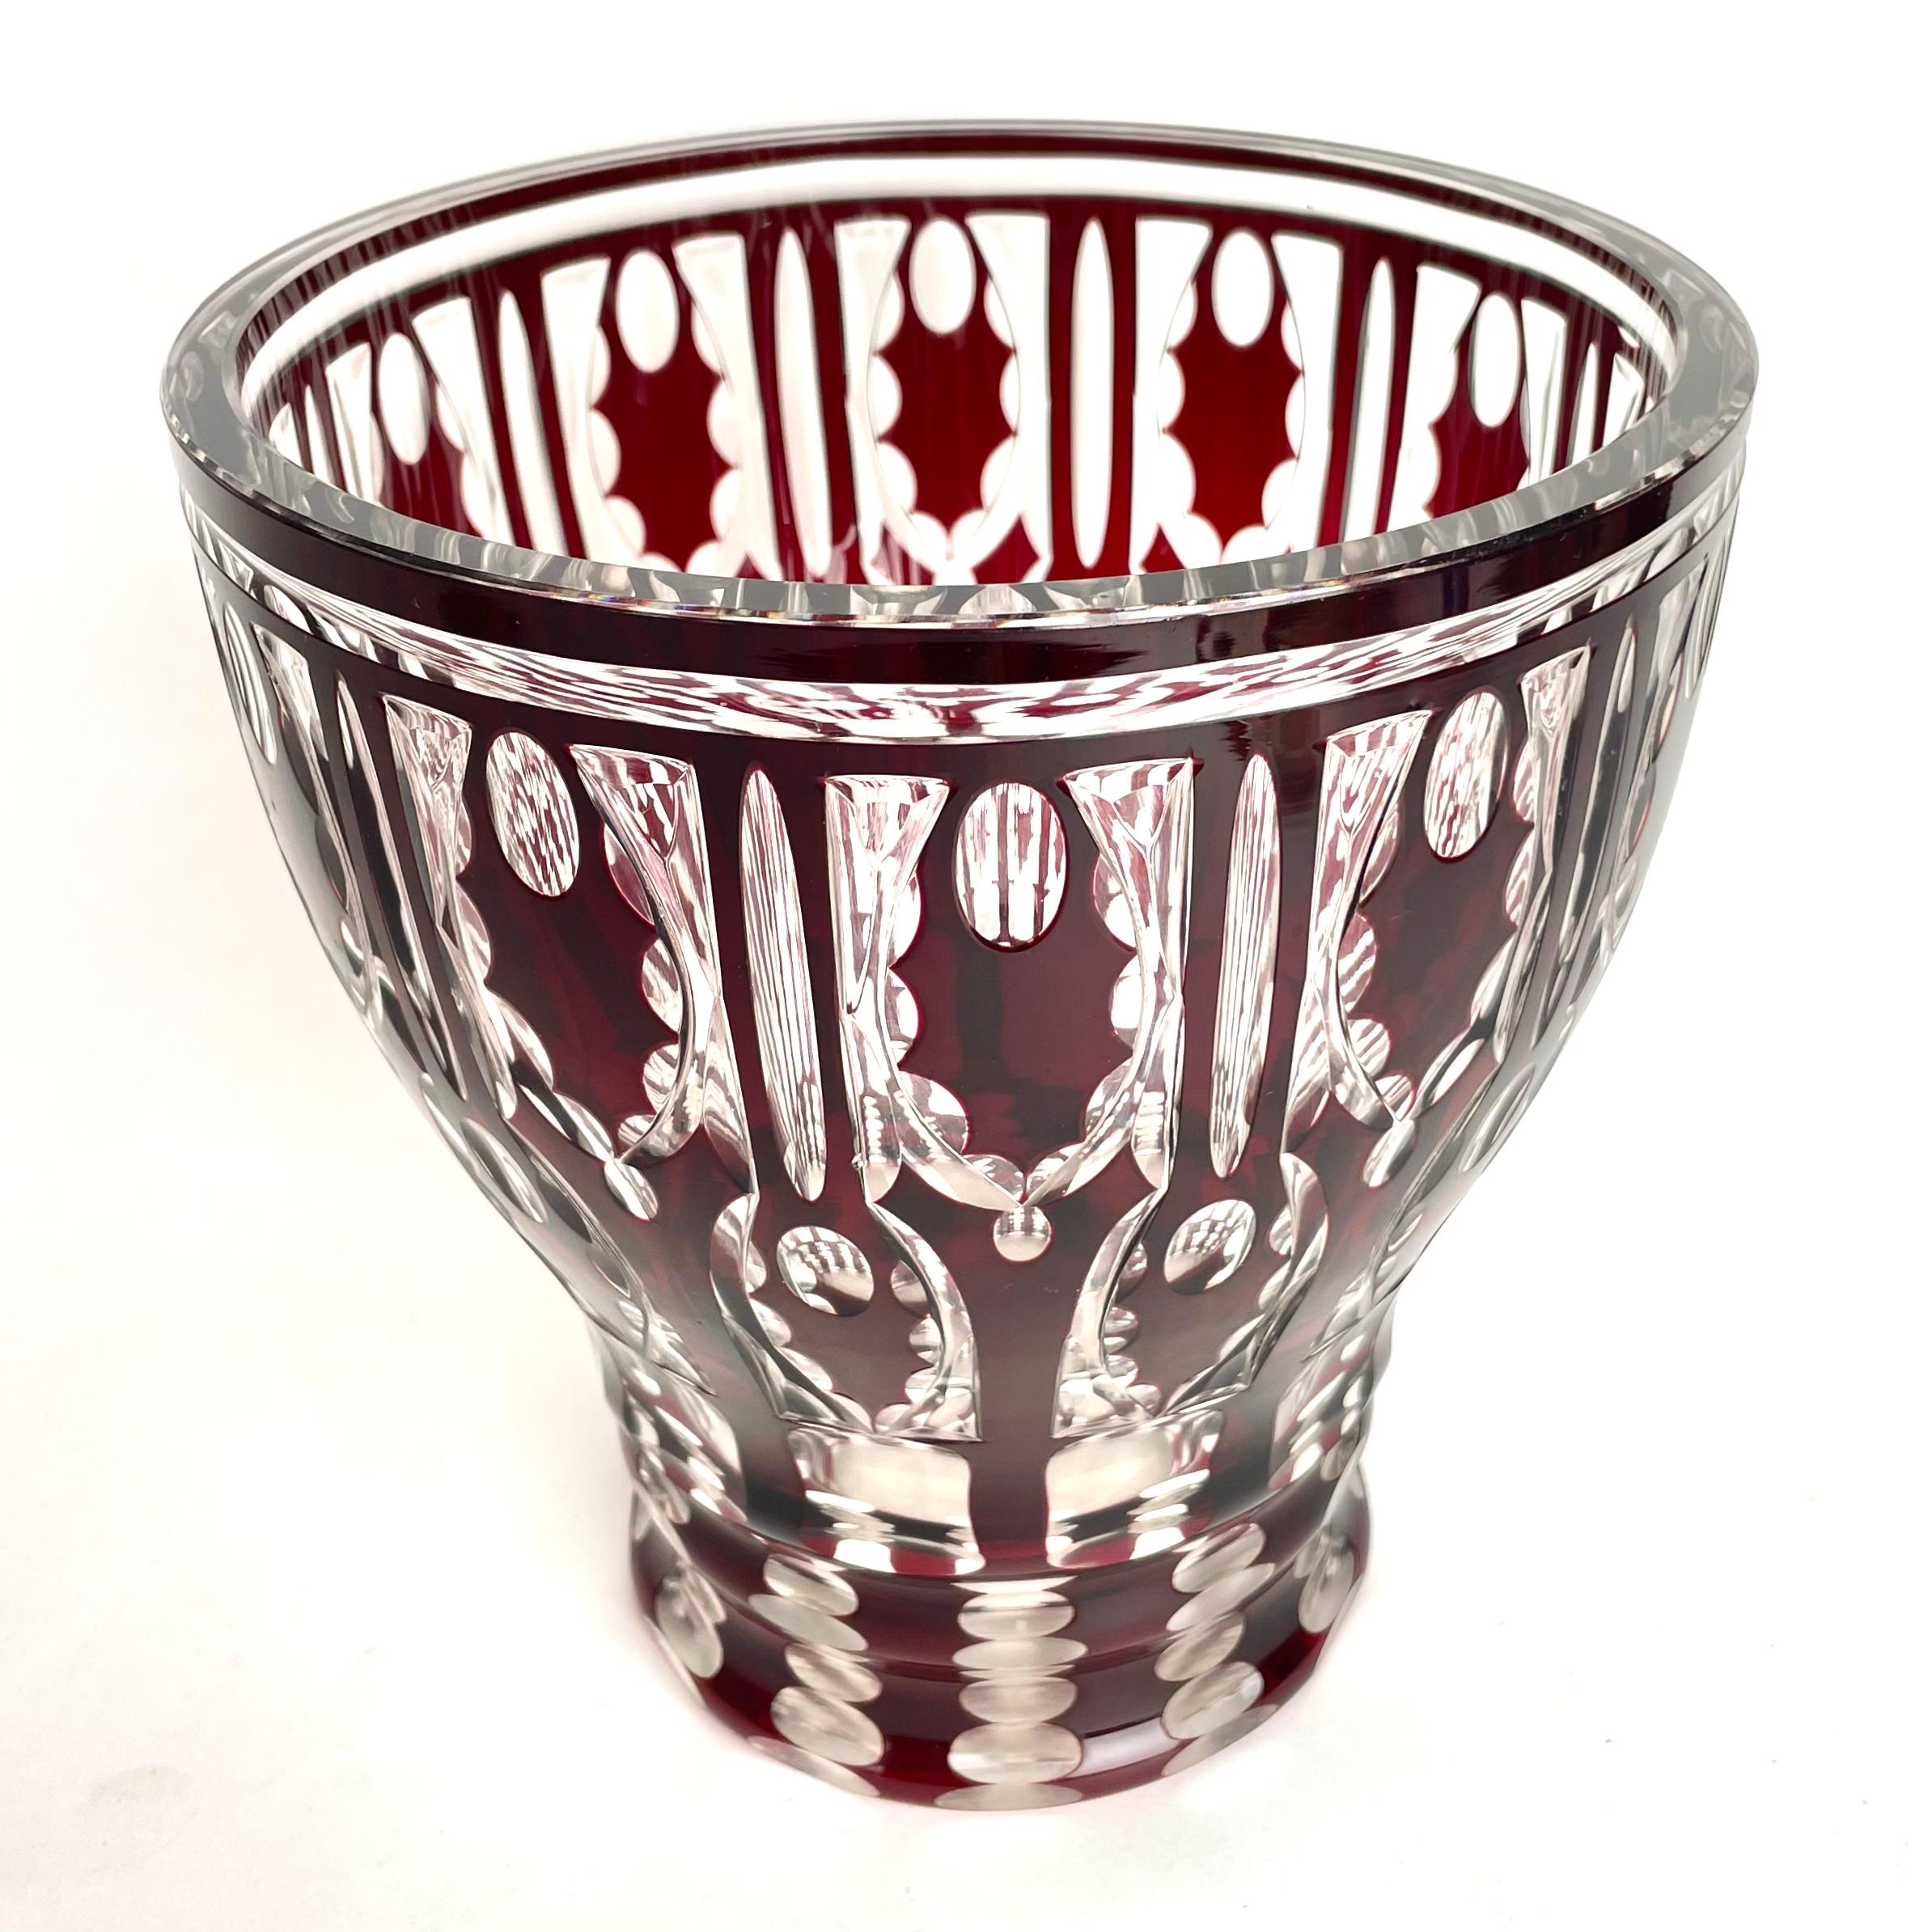 A large Bohemia Cut Crystal Vase from early 20th Century. Beautiful color and fine craftmanship. Can also be used as a wine cooler.

Wear consistent with age and use 